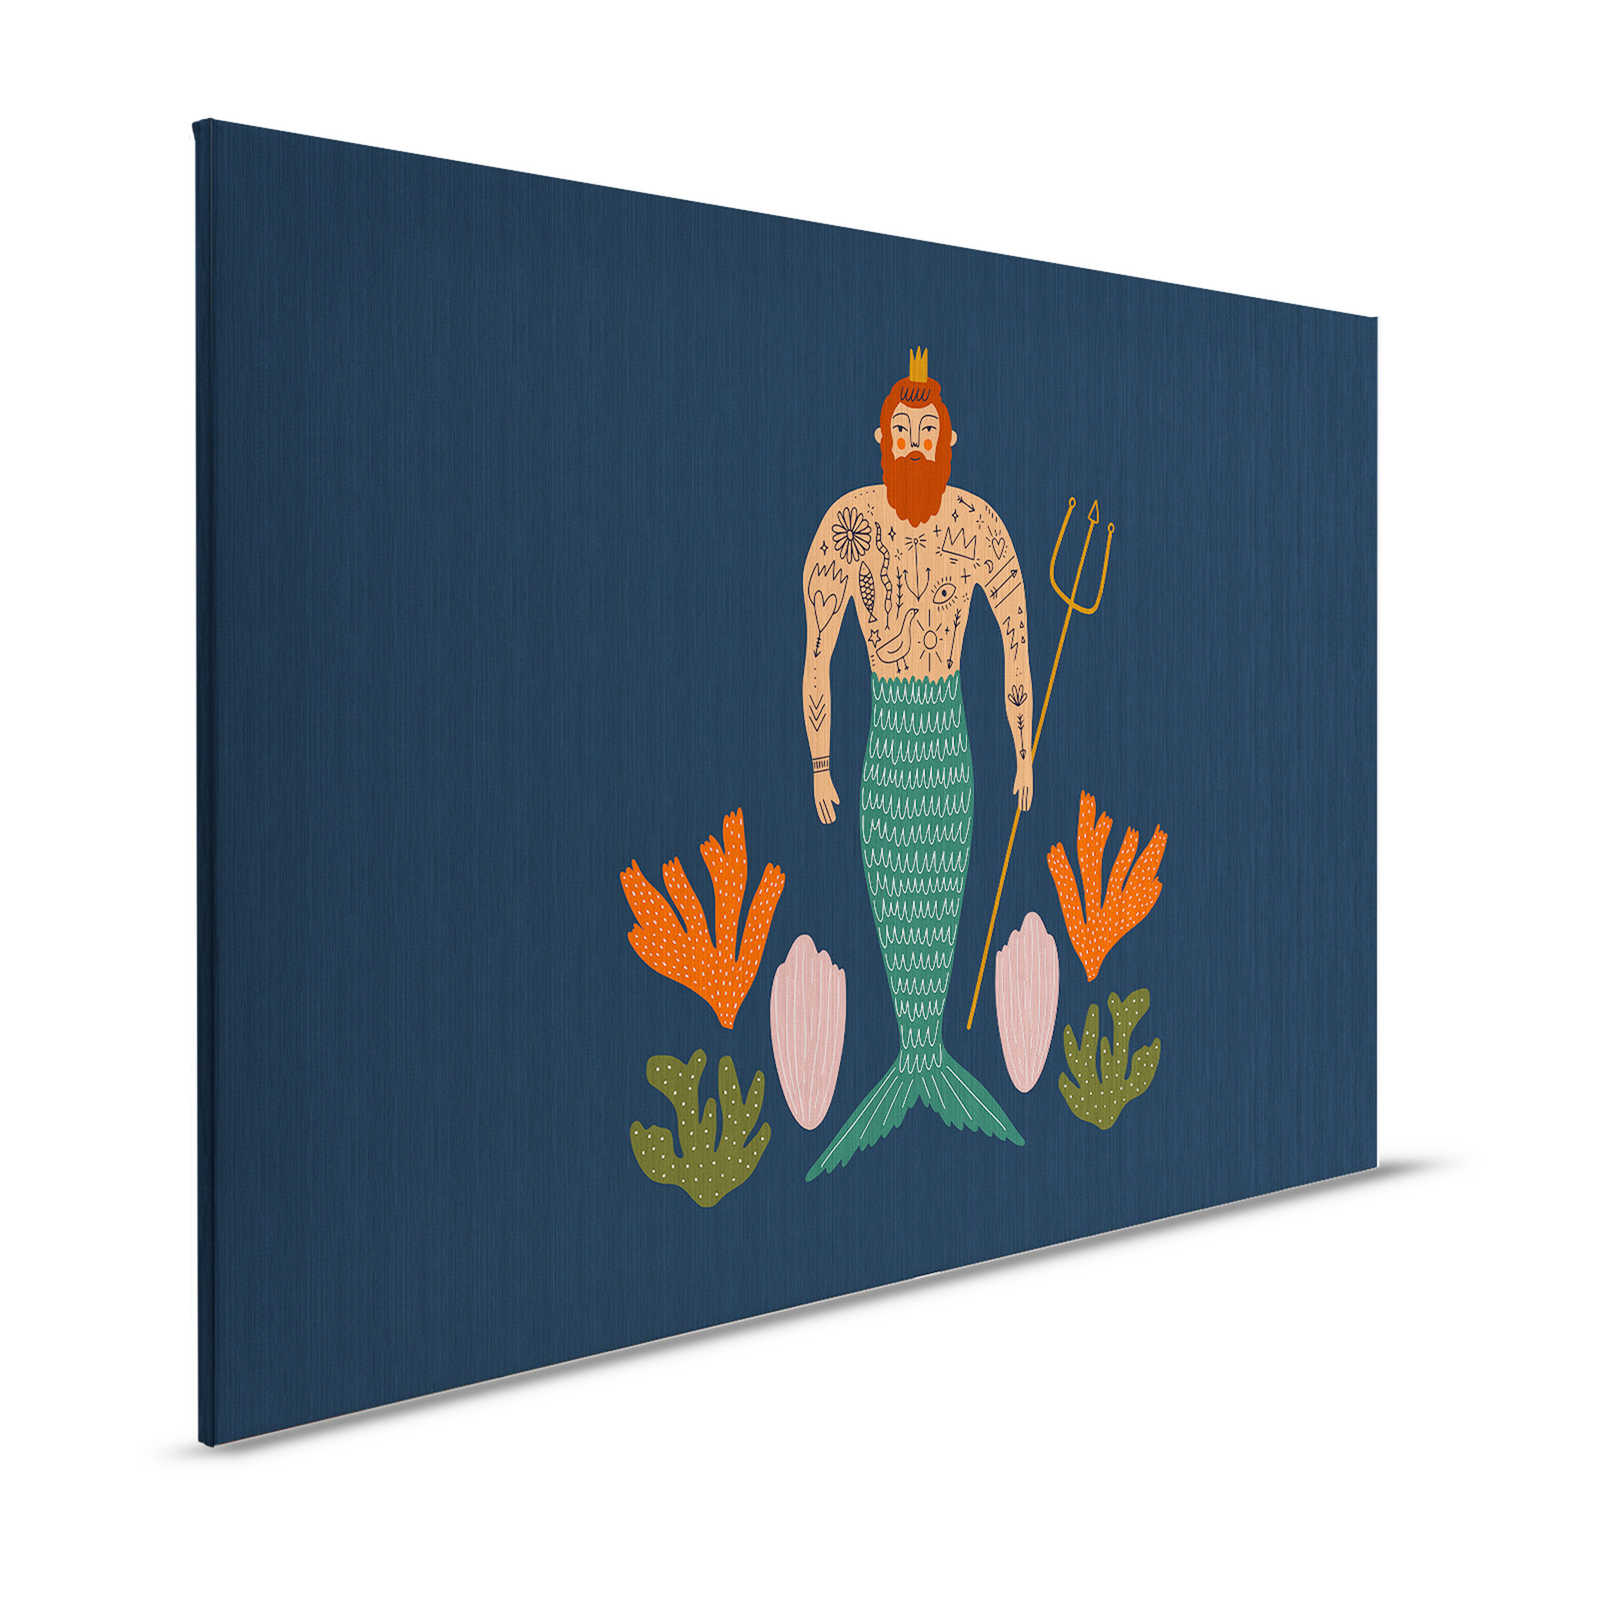 Down Under 1 - Canvas painting merman maritime pattern in comic style - 1,20 m x 0,80 m
